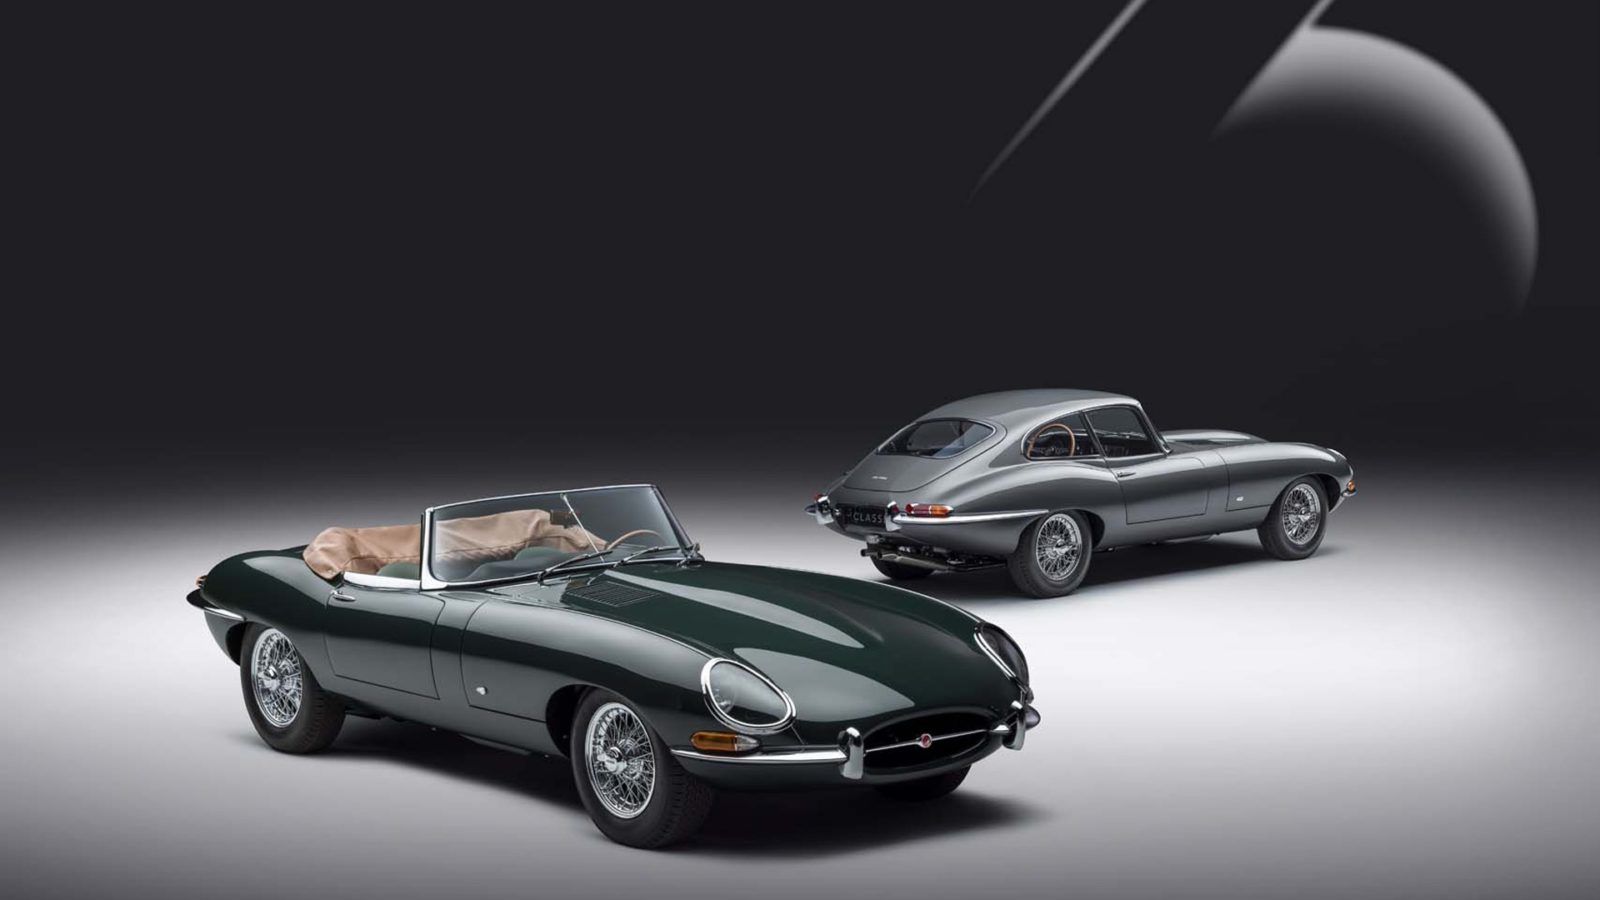 Jaguar celebrates 60 years of the E-type with special edition cars and watches